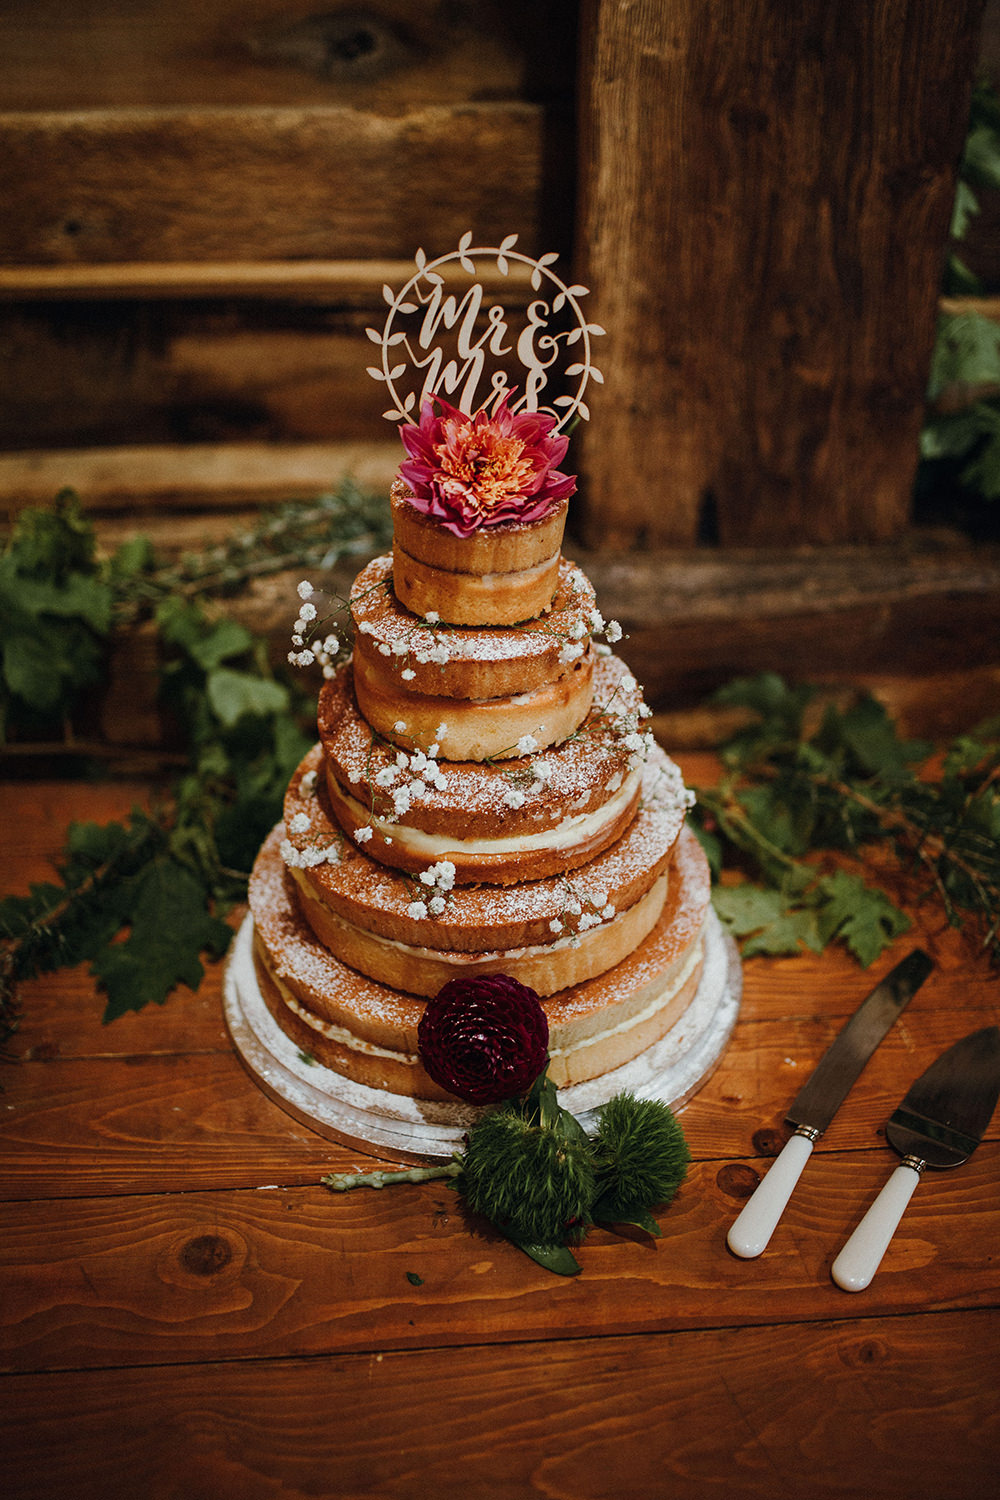 The wedding cake was naked, with baby's breath, bold blooms and a cake topper